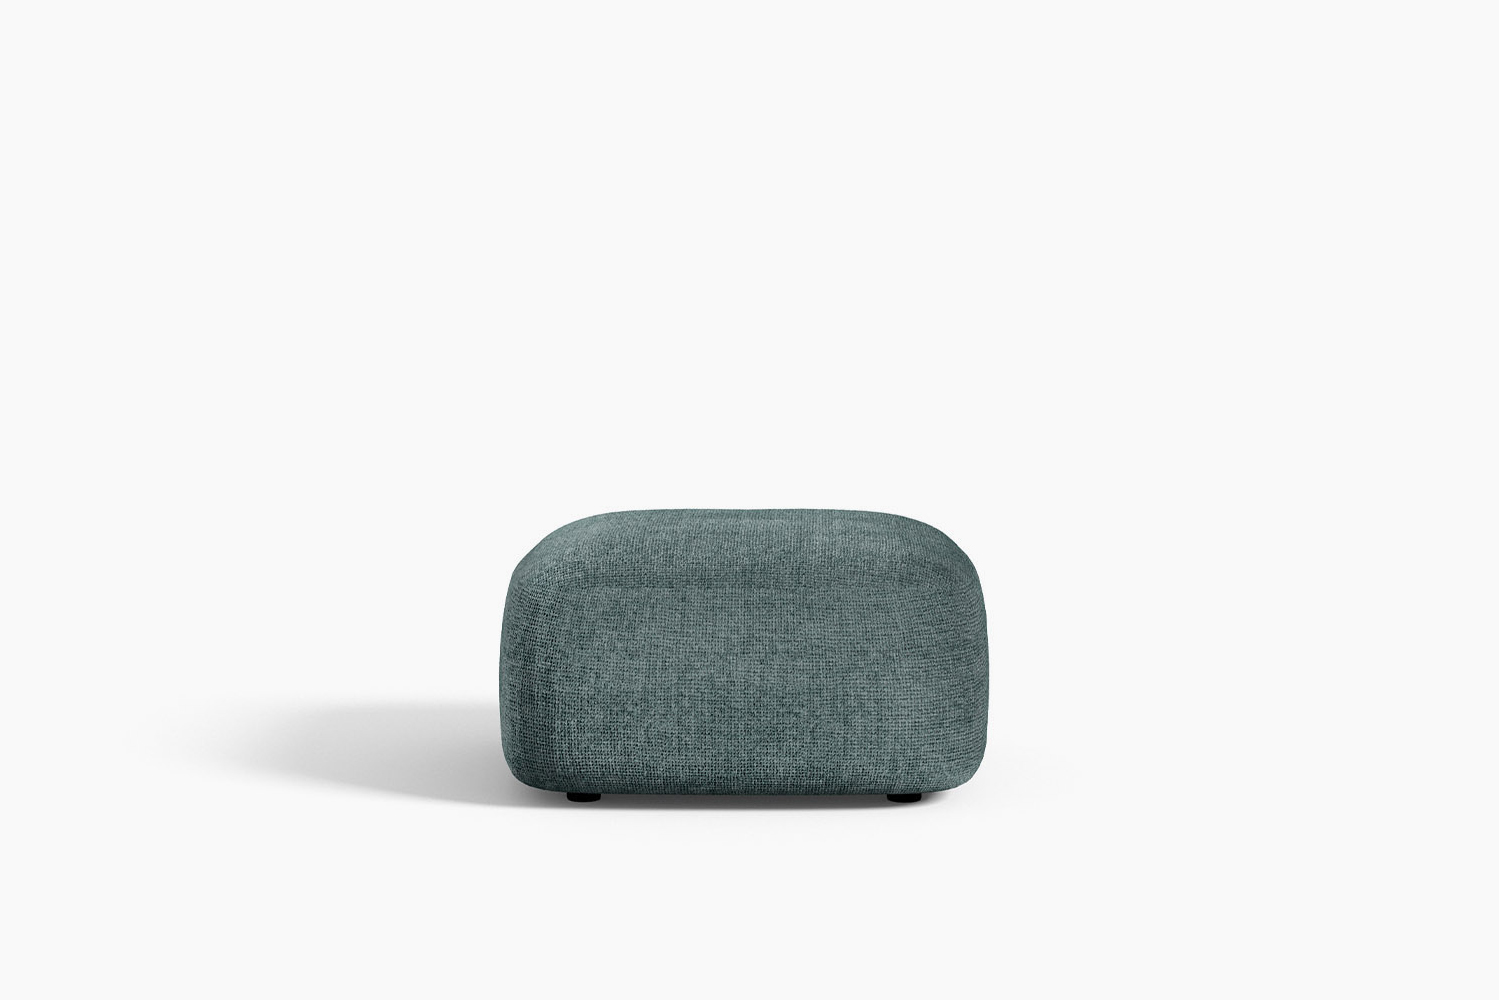 Rounded contemporary luxury ottoman / floor cushion by Novamobili. Sold by Krieder UK.